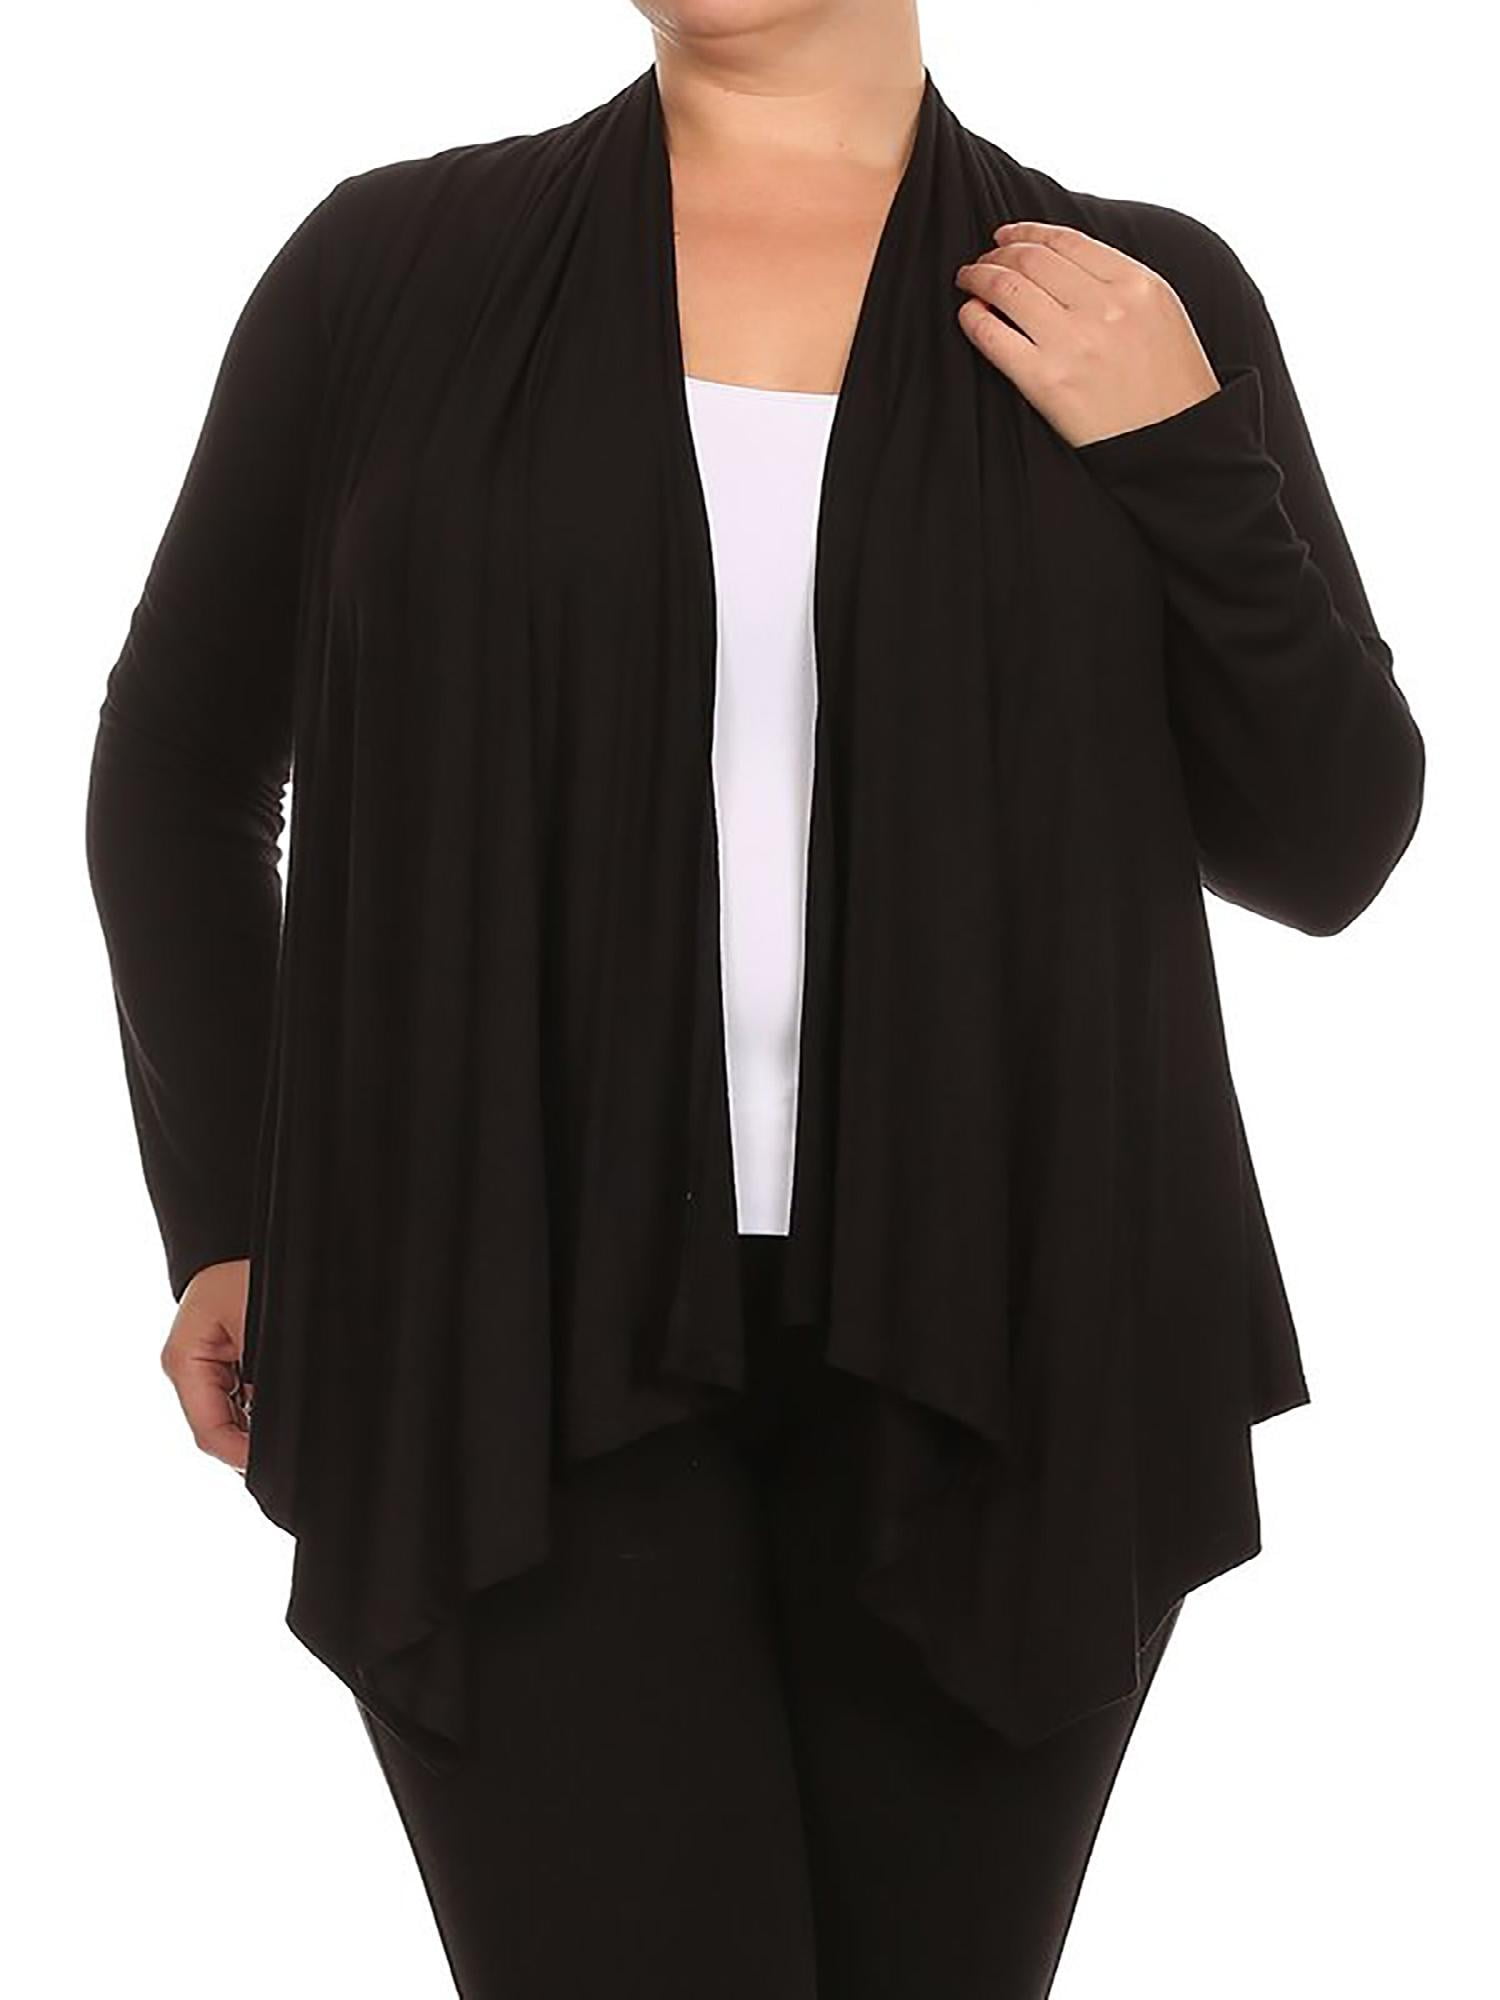 Womens Plus Size Solid Casual Long Sleeve Drape Open Front Jacket Cardigan/Made in USA 